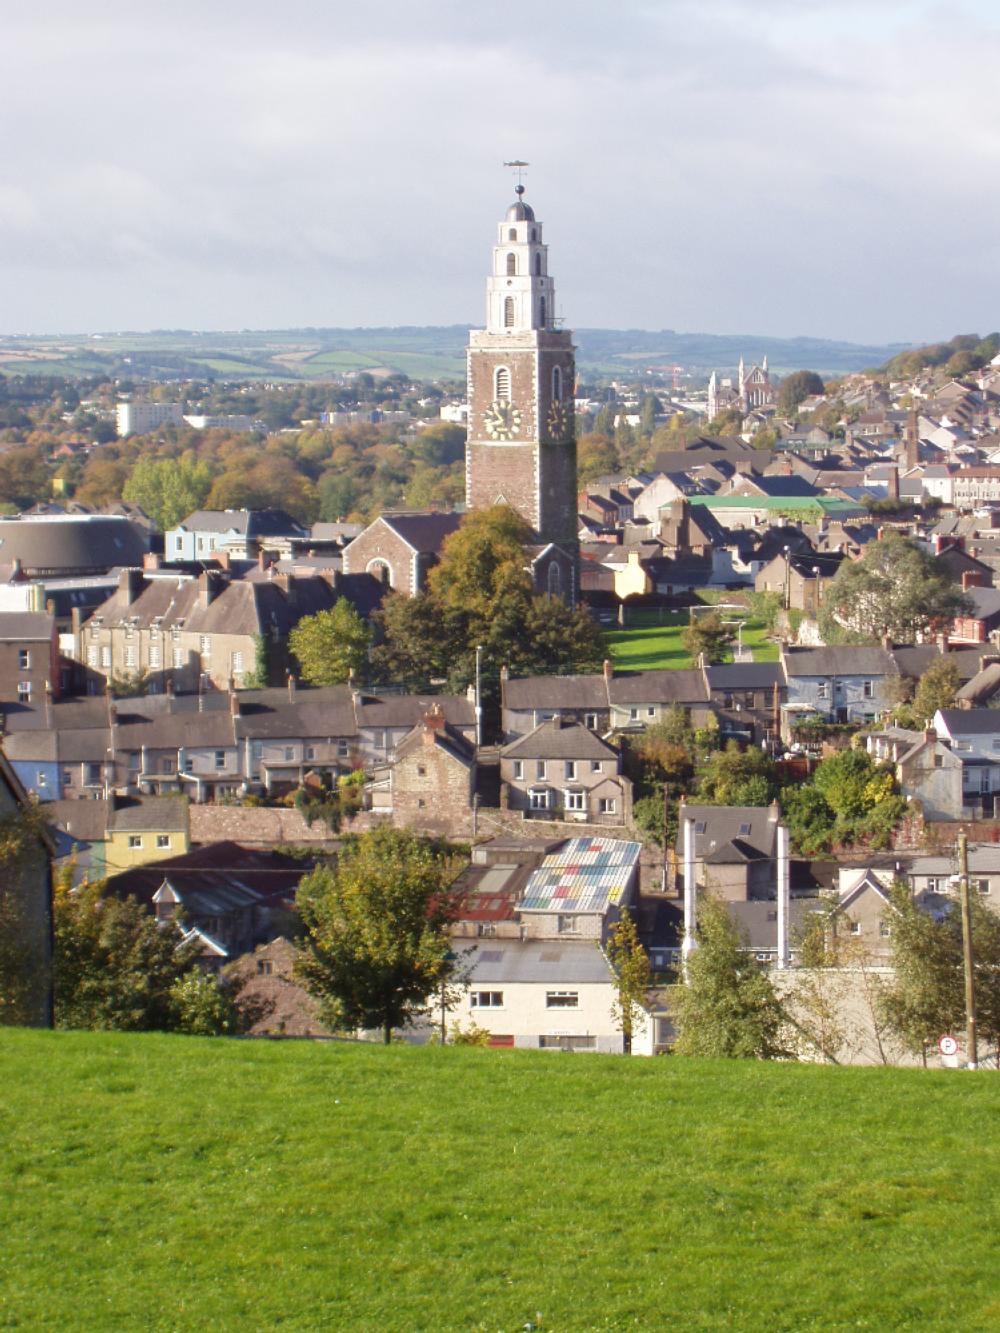 A view of Cork clock tower with the city below it